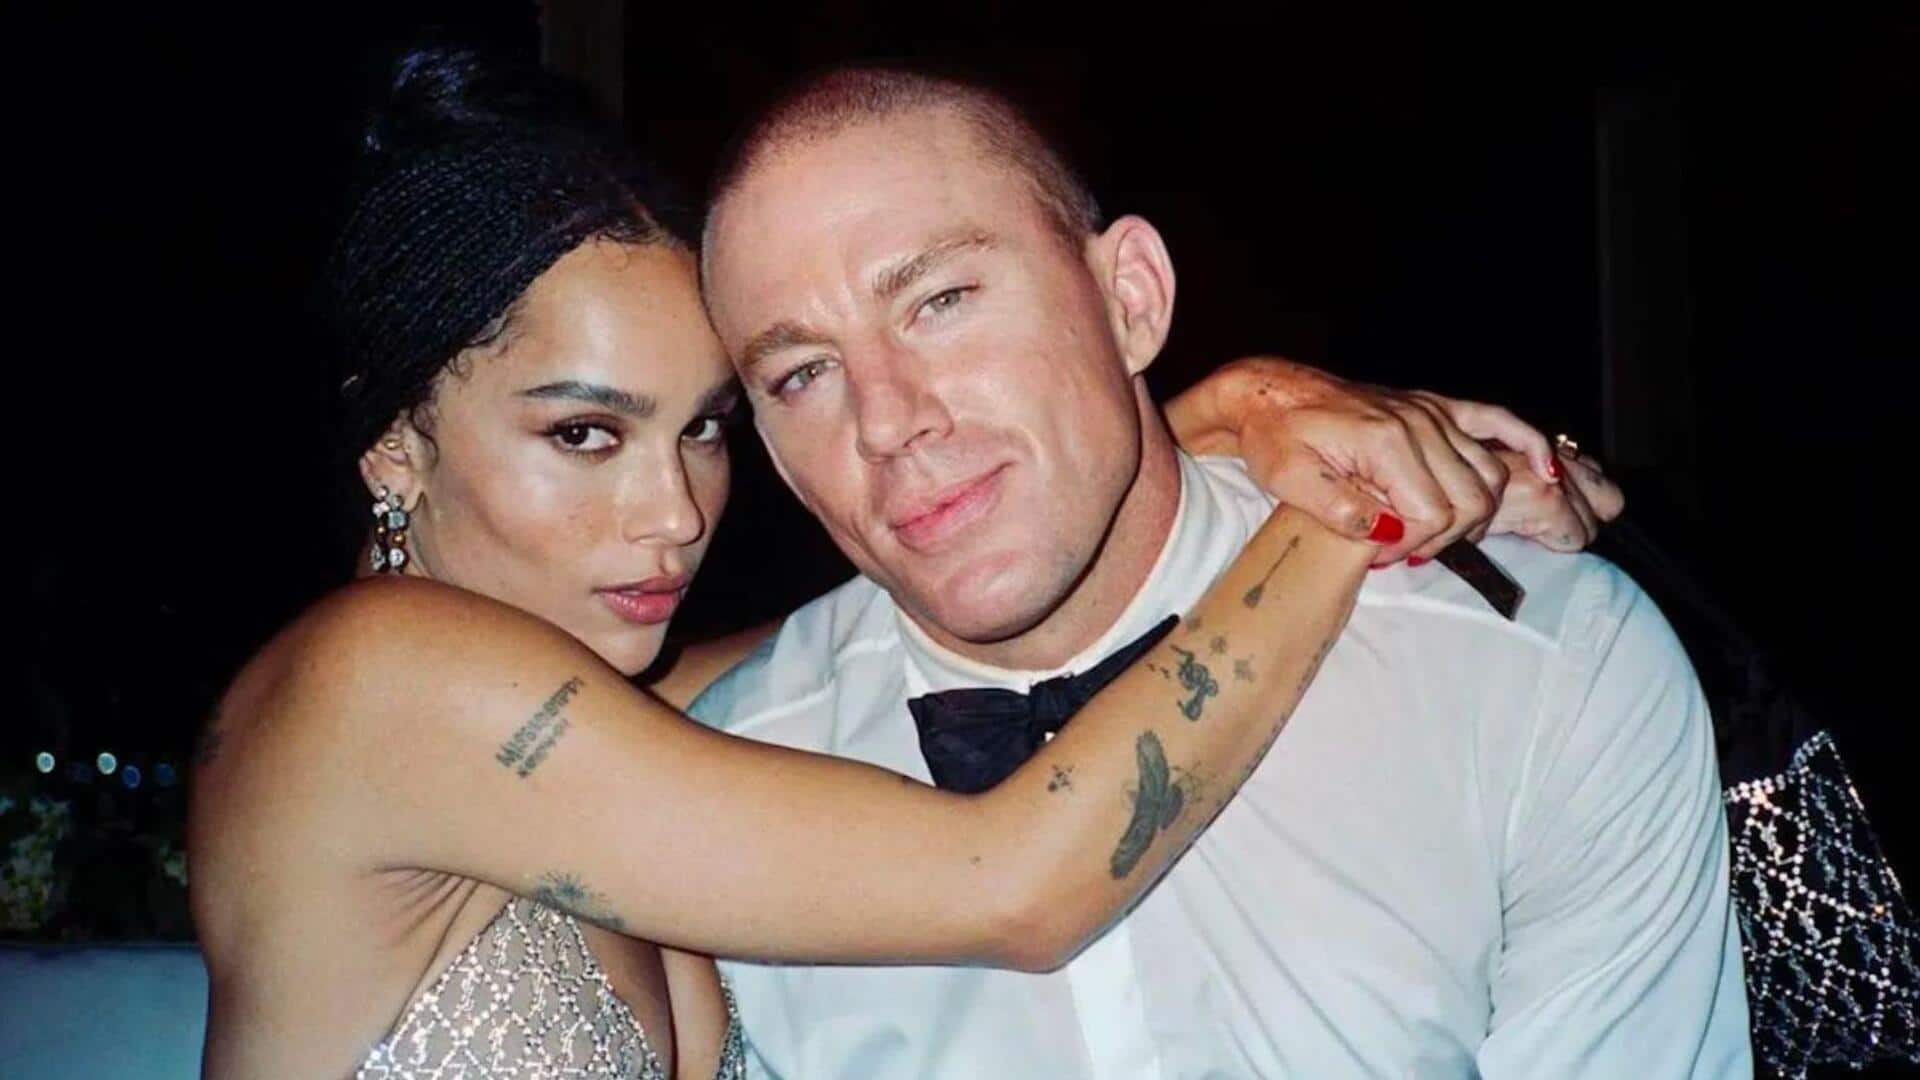 Zoë Kravitz-Channing Tatum engaged after 2yrs of dating? Find out